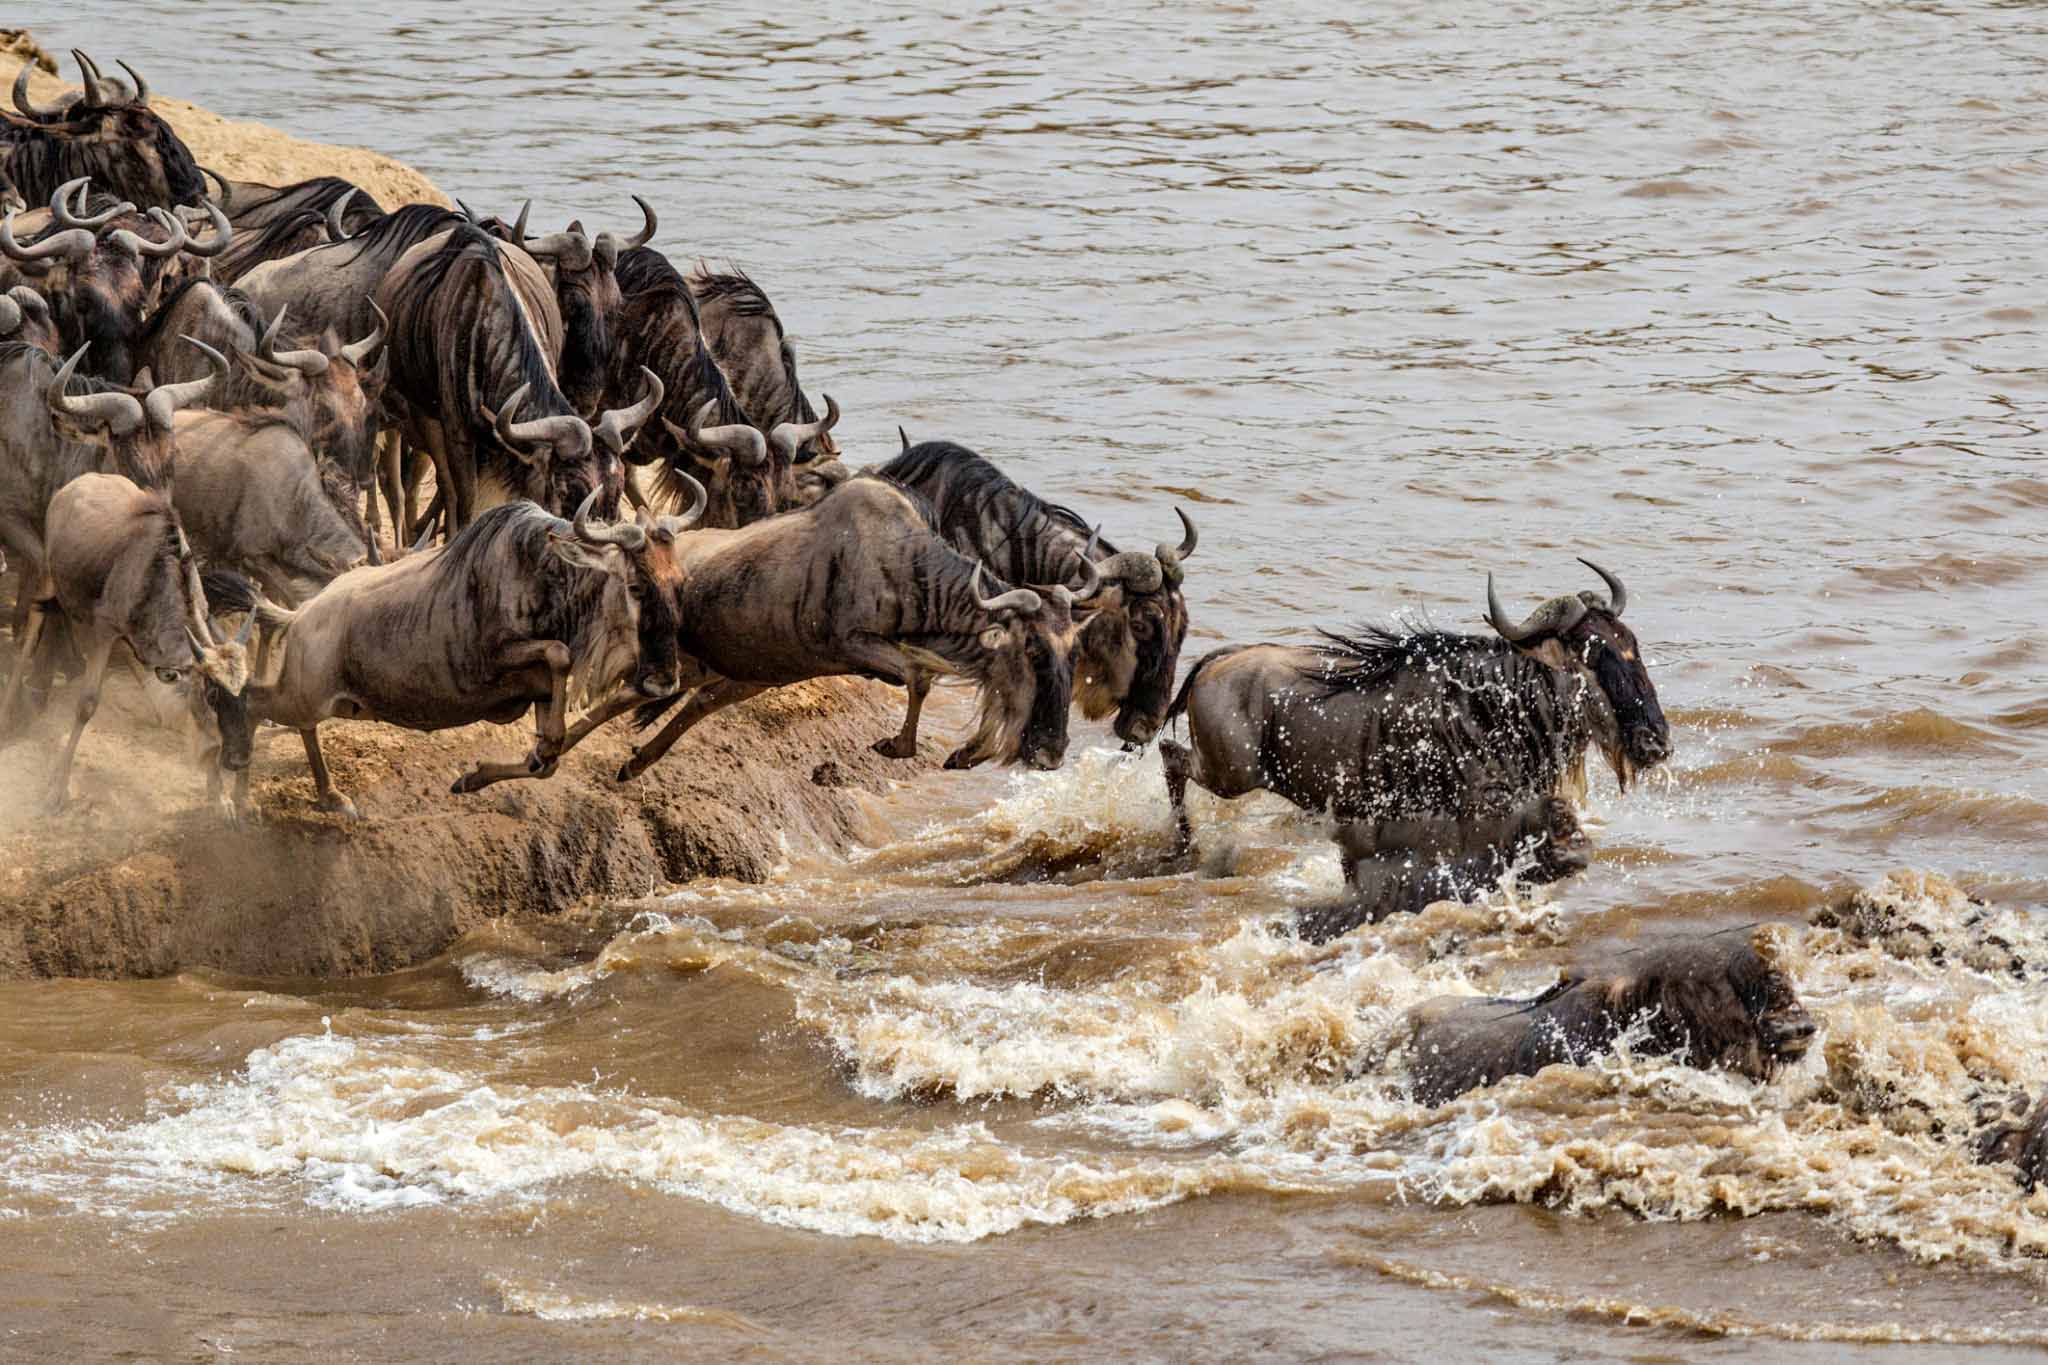 The areas to be covered are Lake Ndutu and the Southern and Central areas of Serengeti National Park